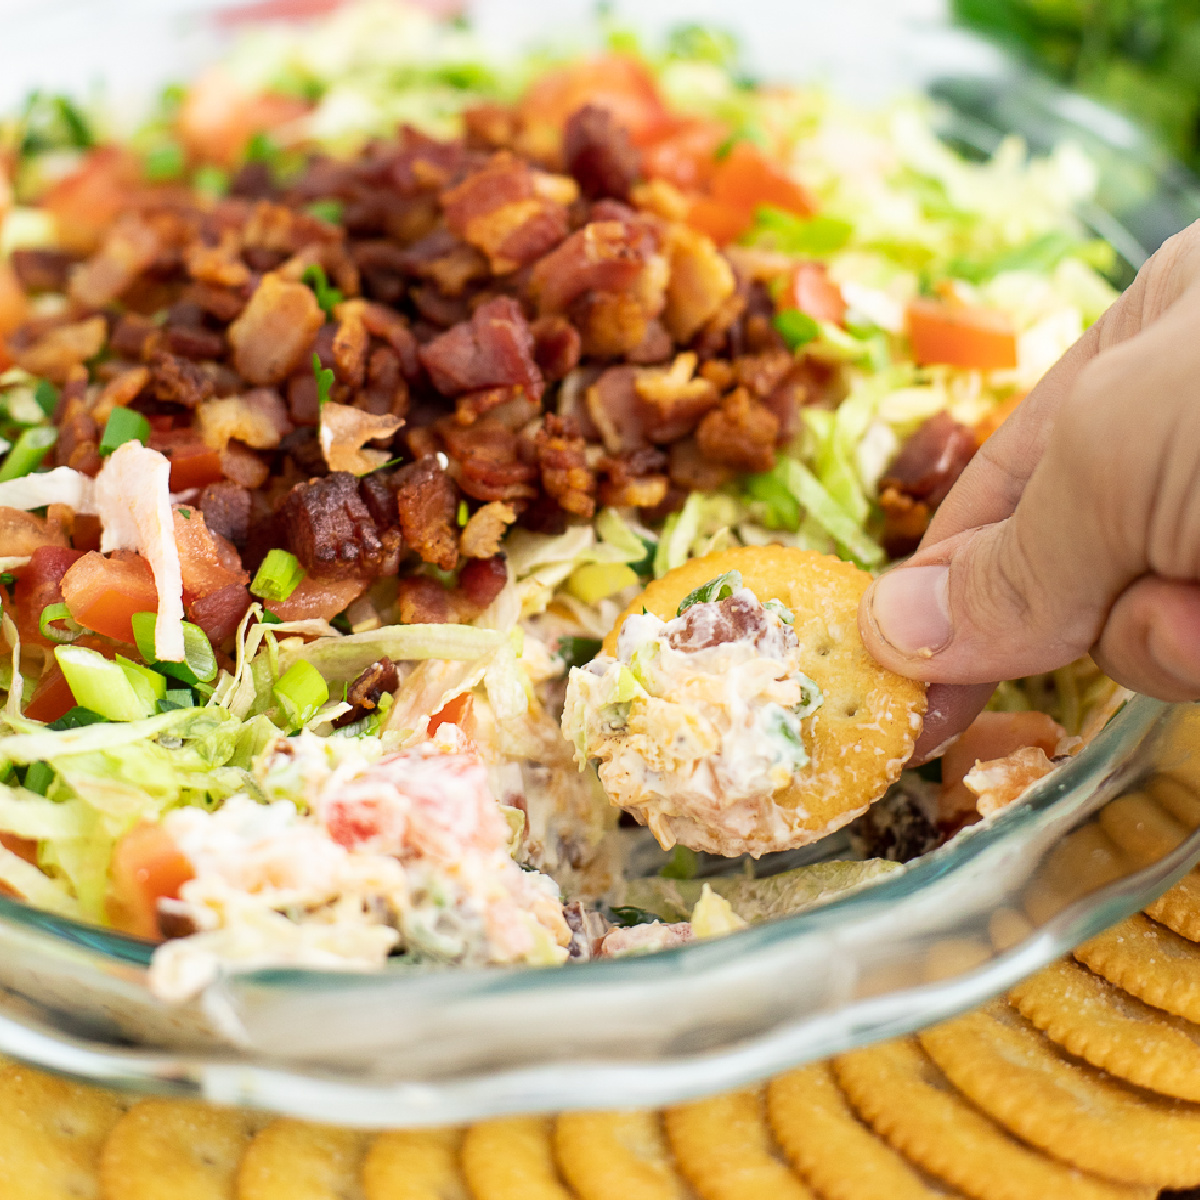 BLT Dip topped with shredded lettuce, crispy bacon, and ripe diced tomatoes with a cracker dipping into it.